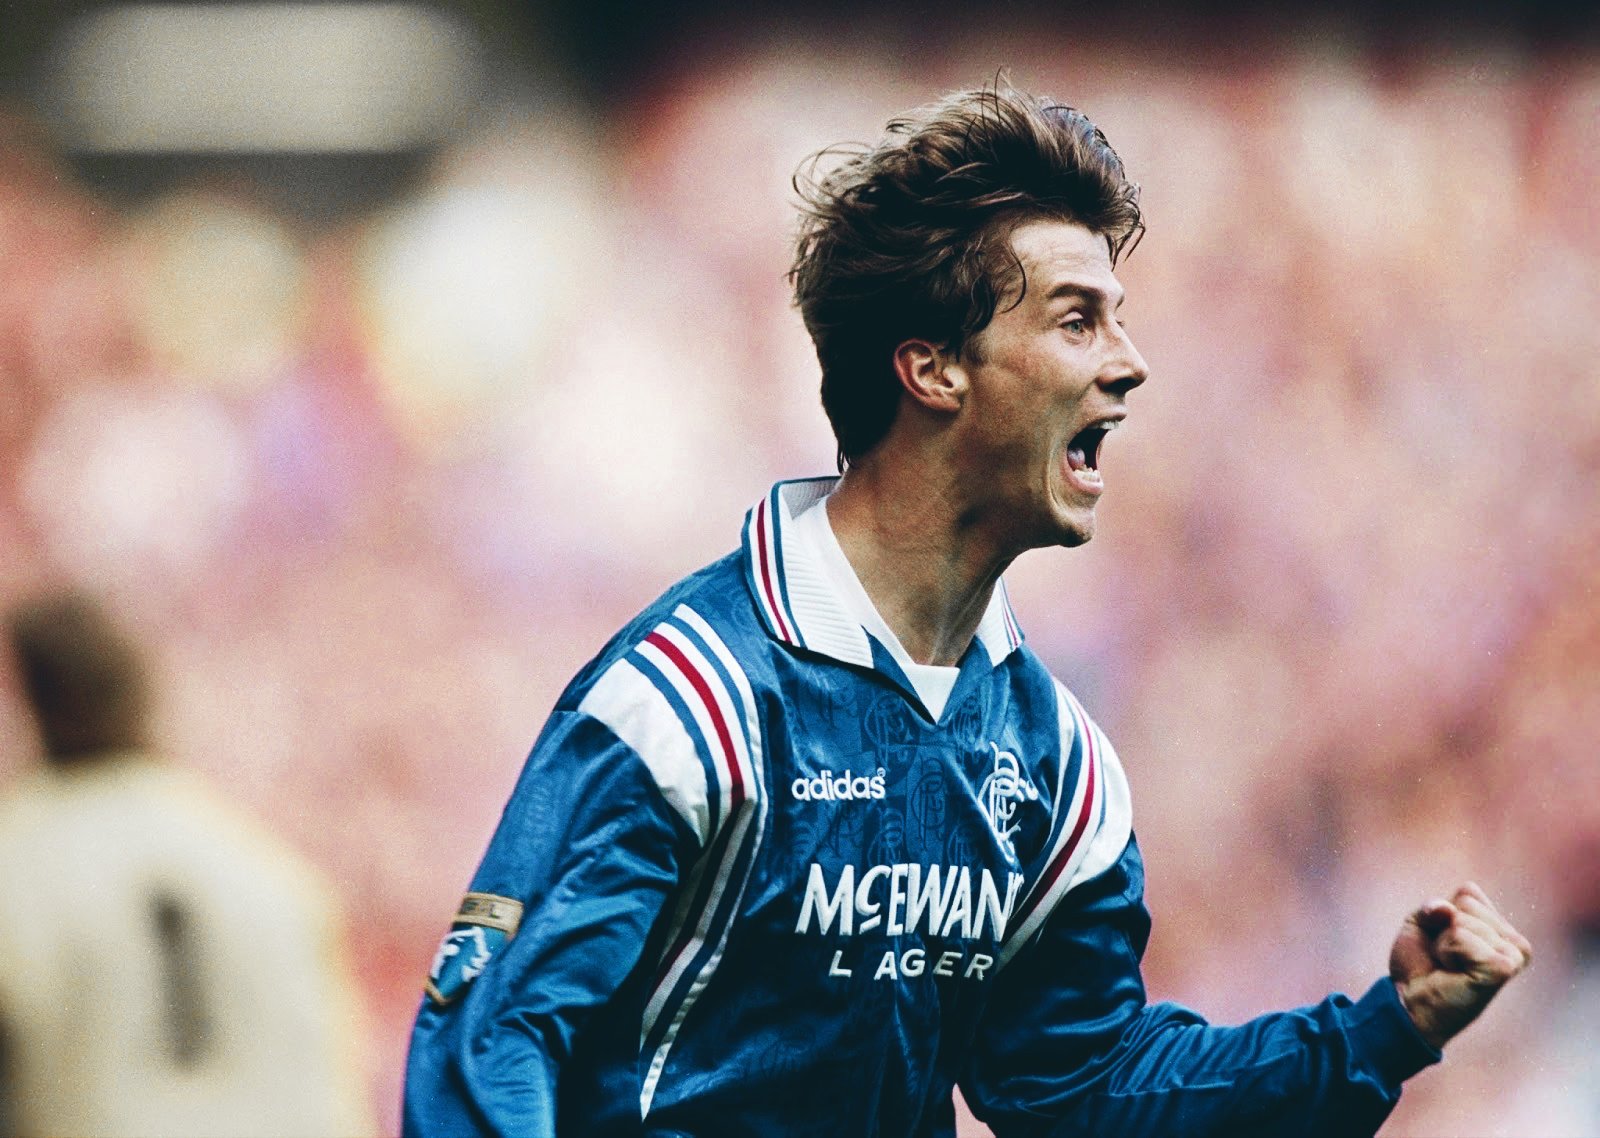 Michael Laudrup And The Death Of A Once Great Ambassador